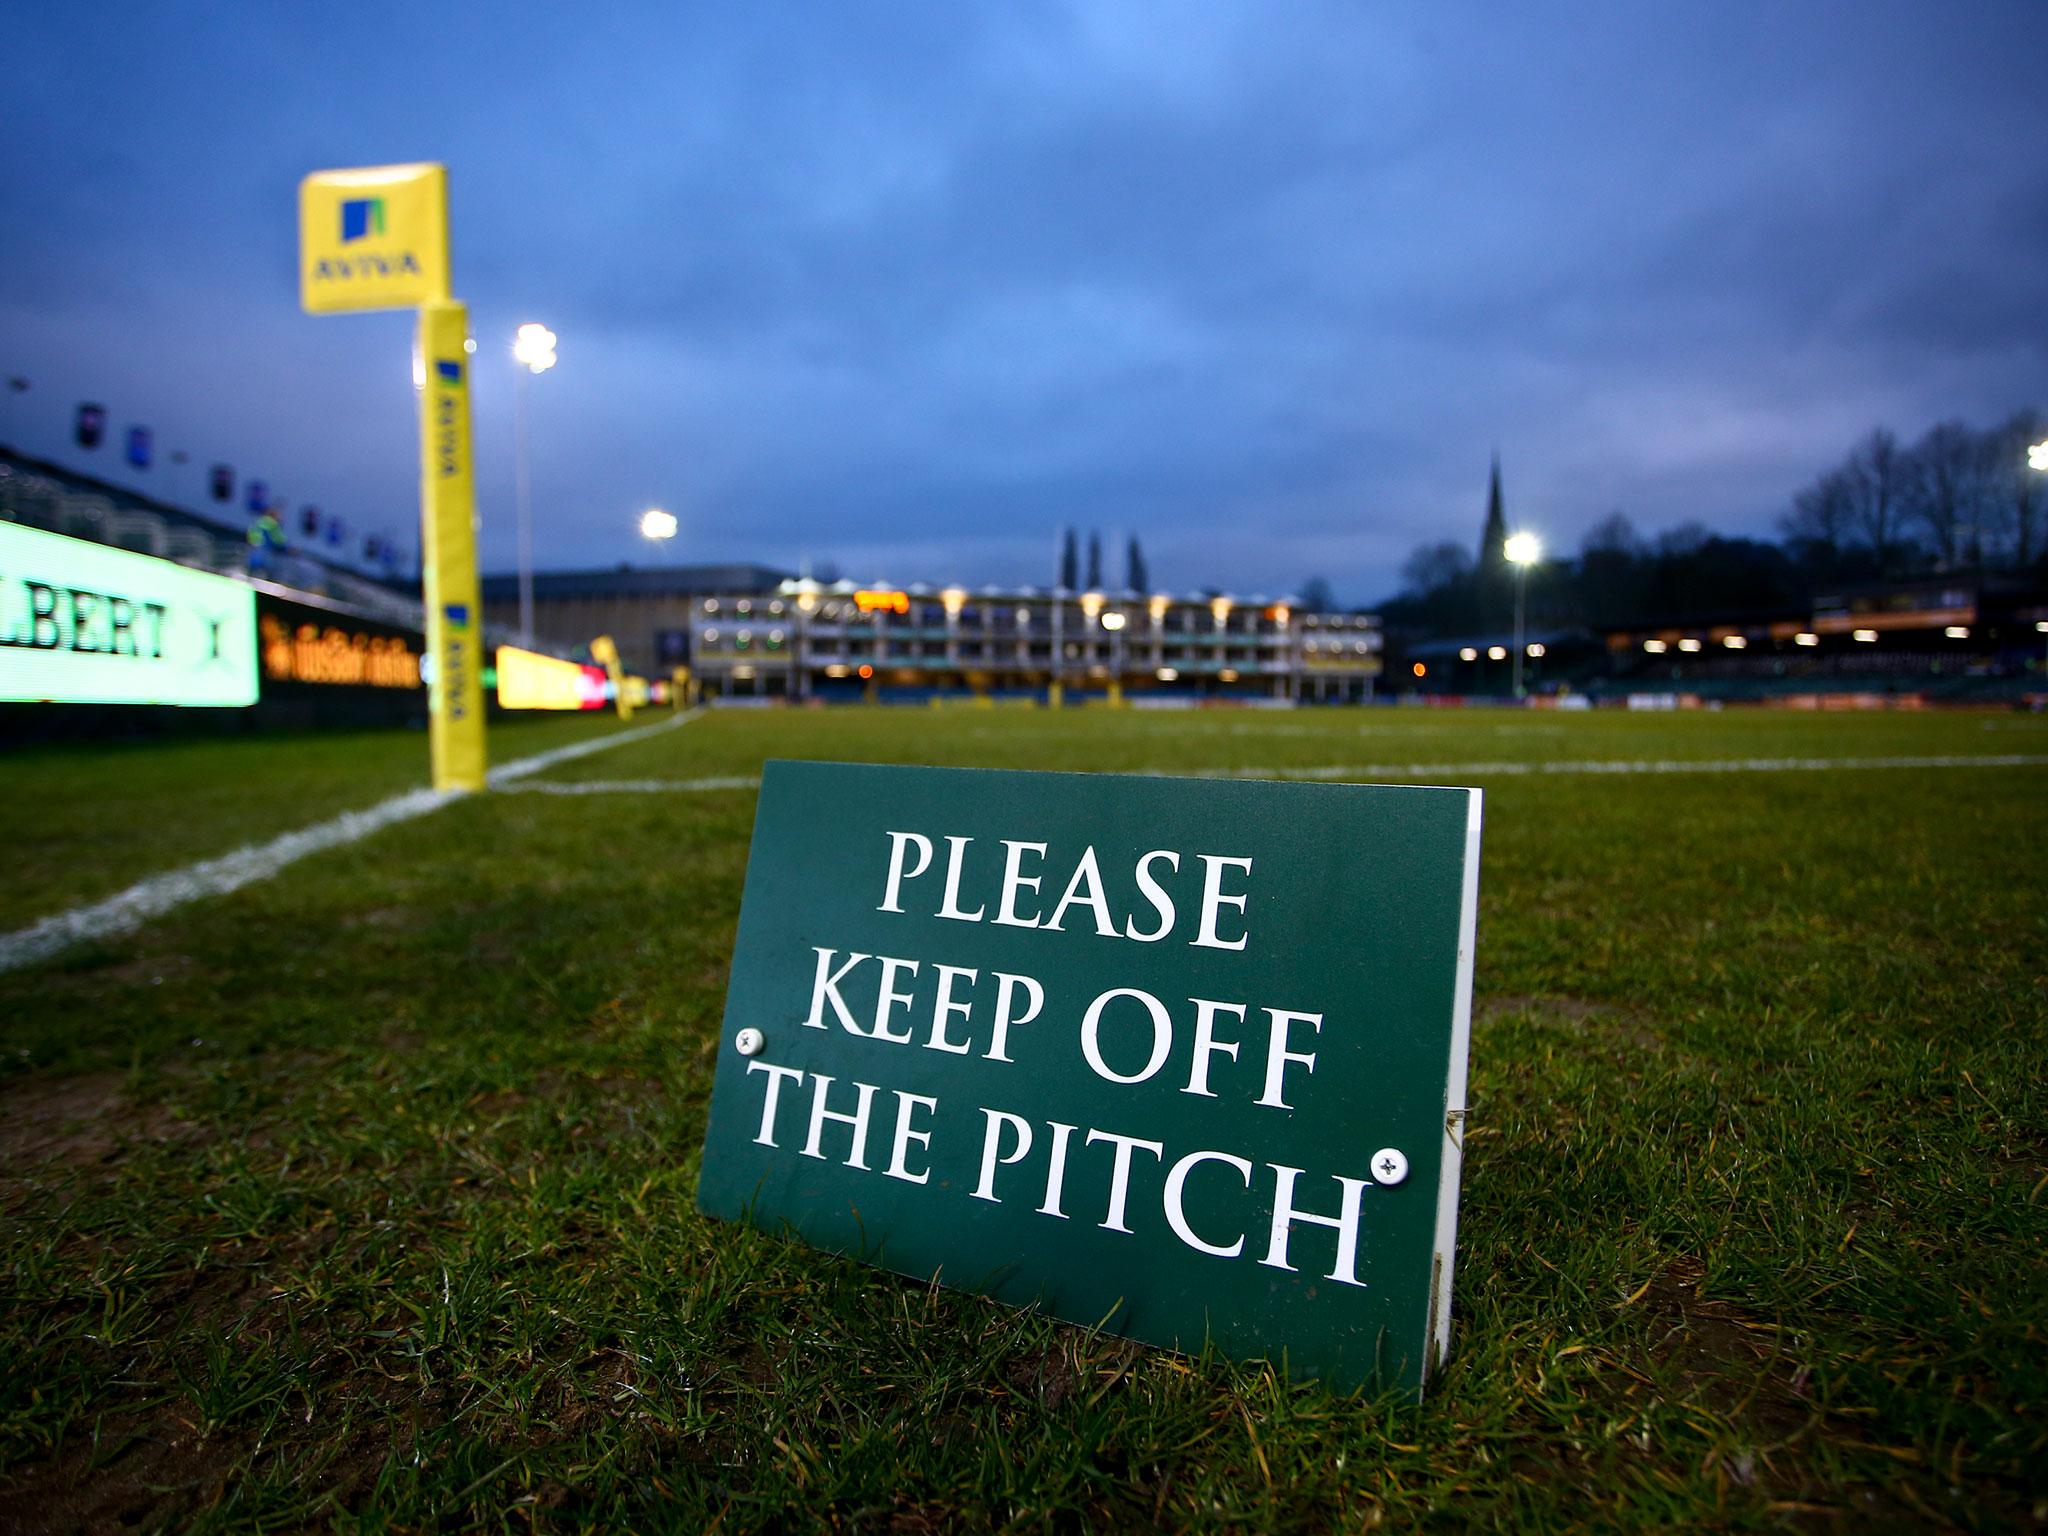 A small section of Bath players are accused of running across the Recreation Ground naked